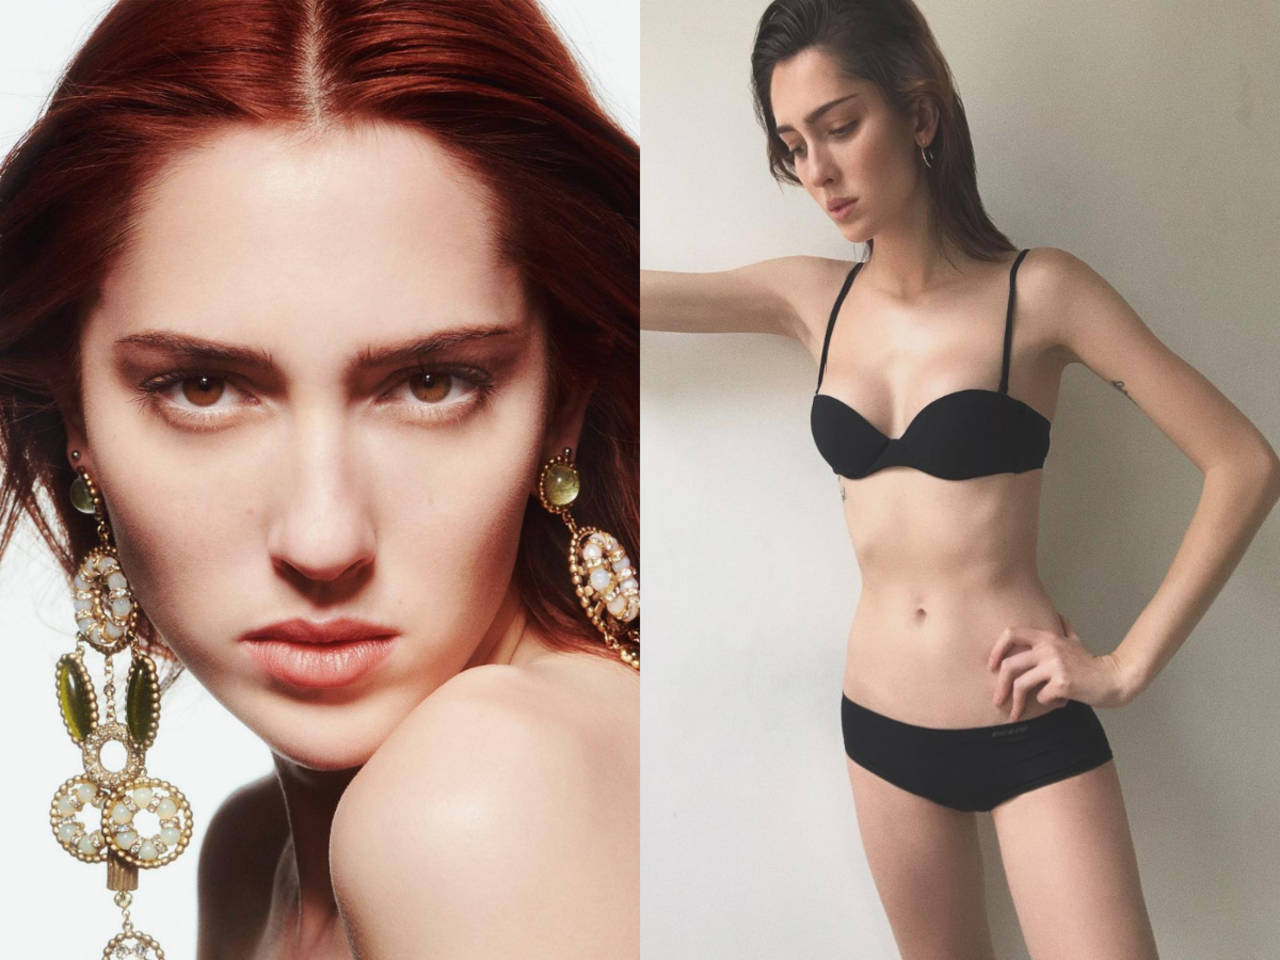 Transgender Model Teddy Quinlivan Is The New Face Of Chanel Beauty